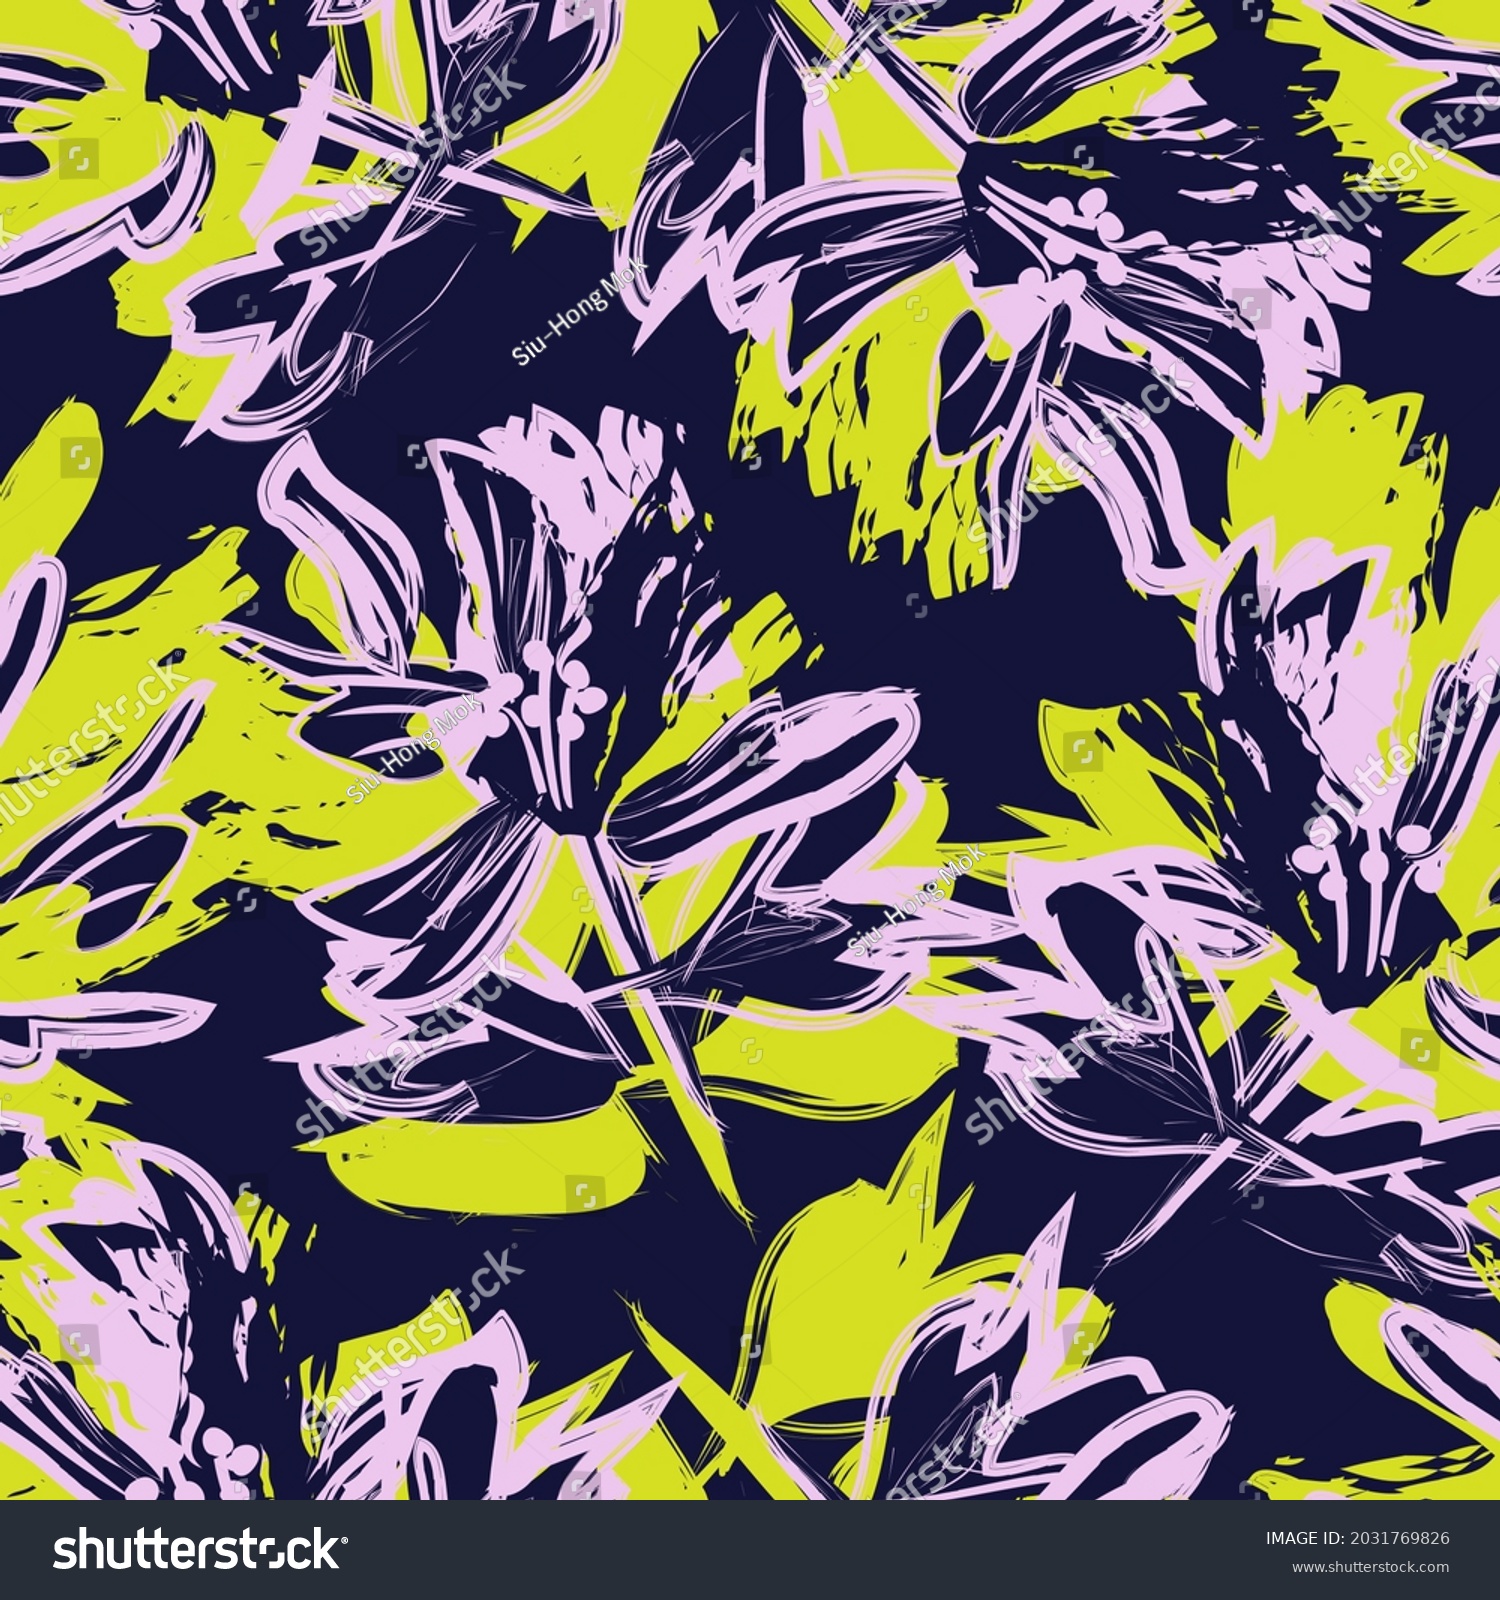 Floral Brush Strokes Seamless Pattern Background Stock Vector Royalty Free